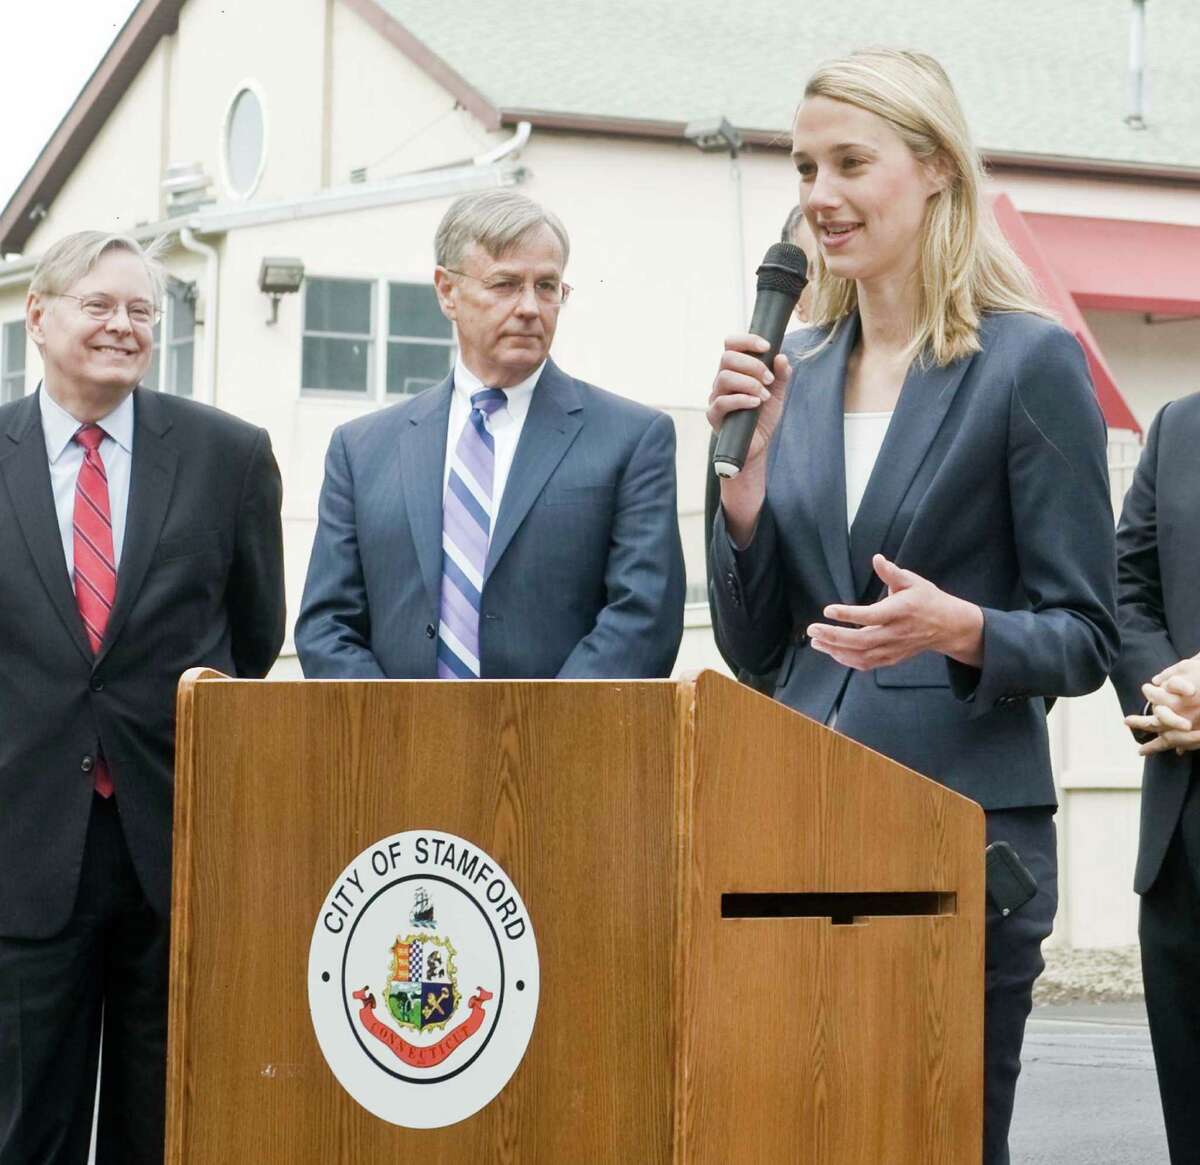 Stamford Mayor David Martin and Commissioner of Connecticut DOT James P. Redeker listen to State Representative Caroline Simmons speak about the new railroad crossing on Riverbend Drive South in Stamford. Thursday, May 21, 2015